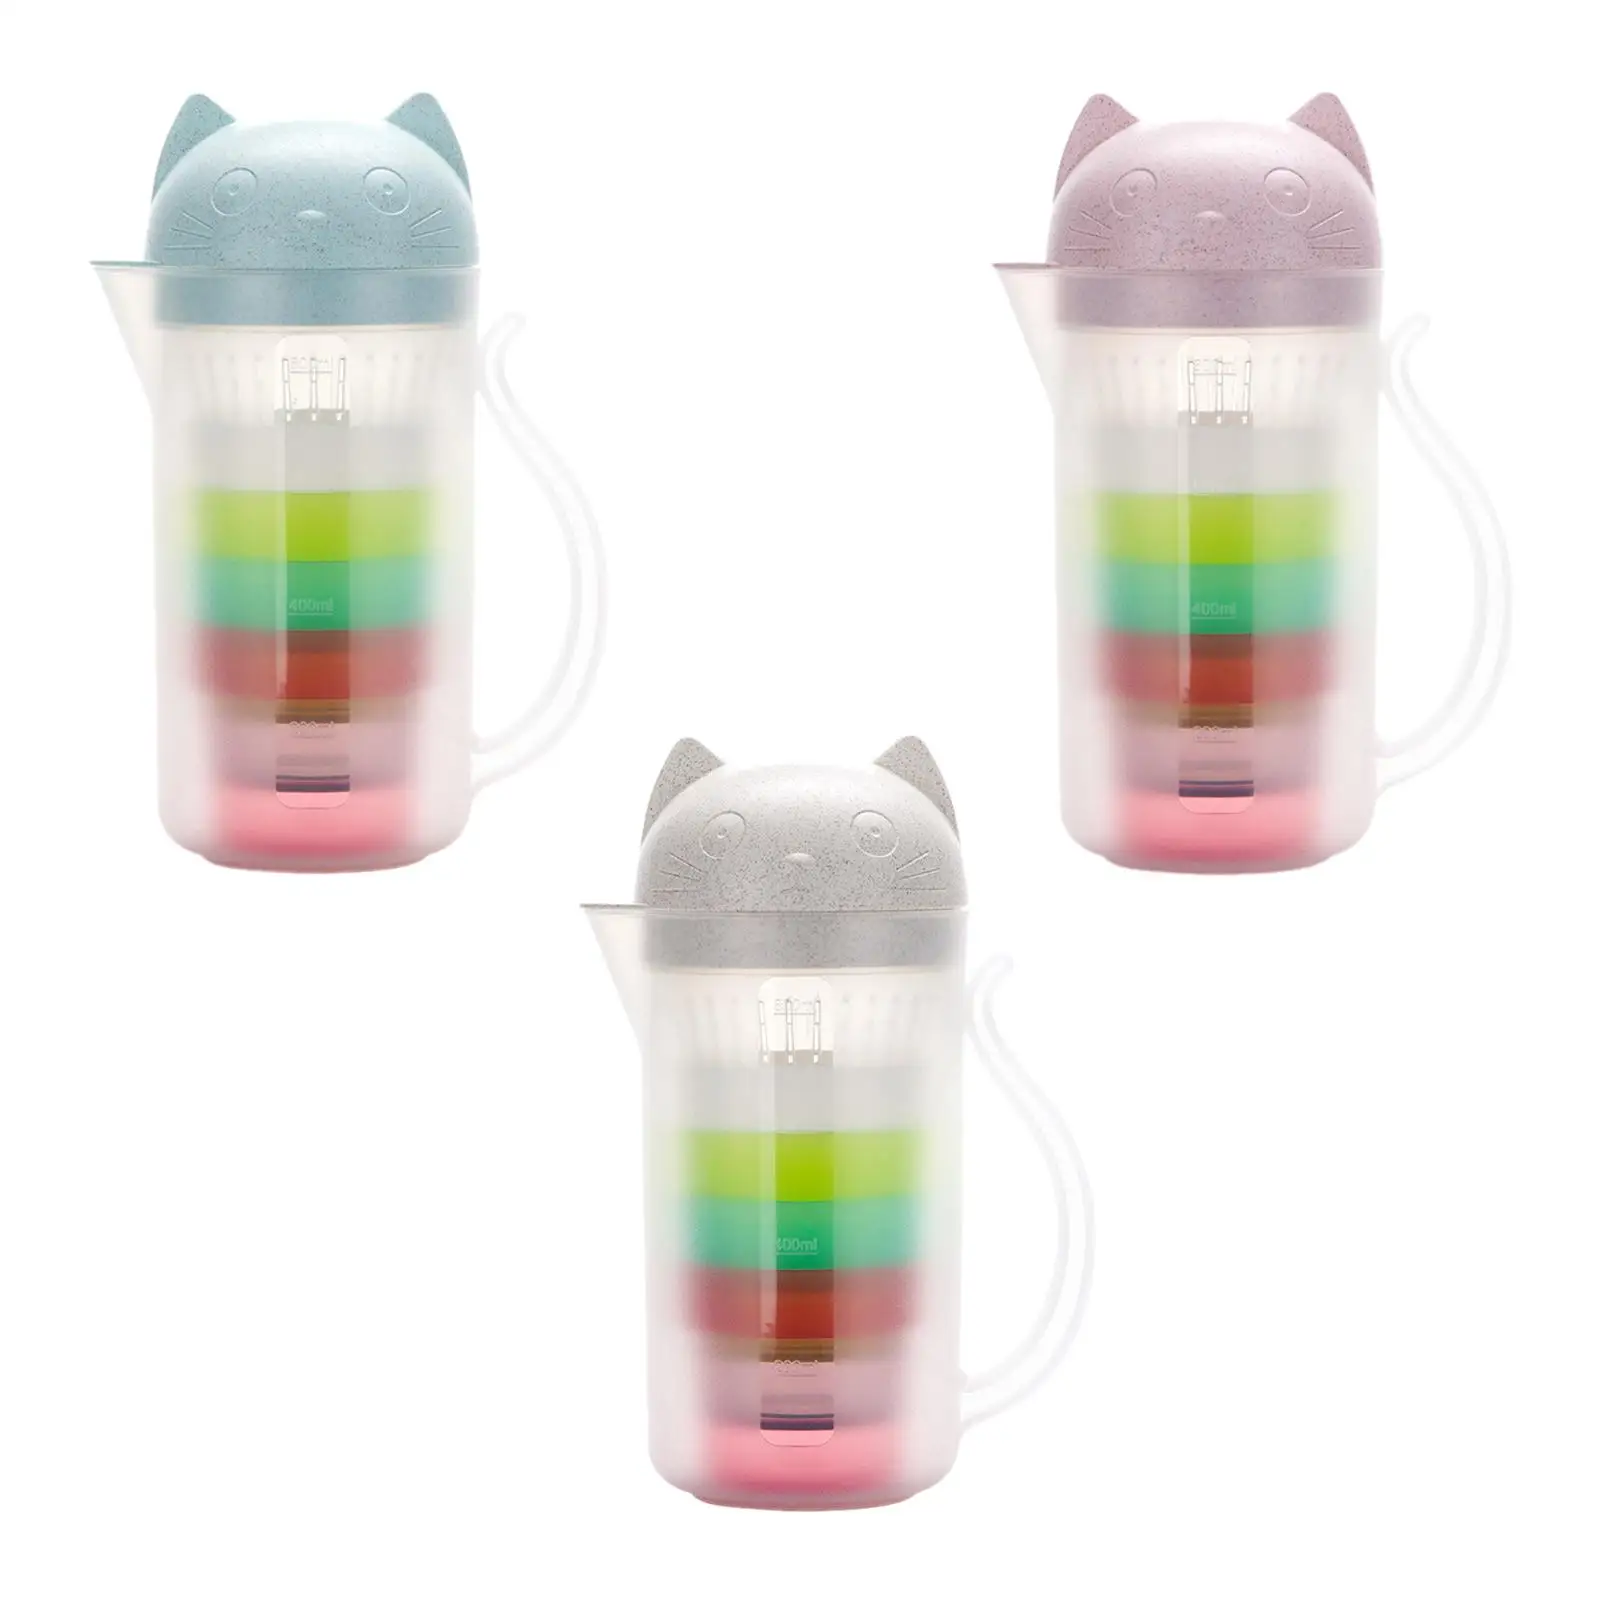 Beverage Pitcher Portable Cute with Filter Ice Tea Pitcher Water Pitcher with Cups for Tea Juice Homemade Beverage Milk Kitchen